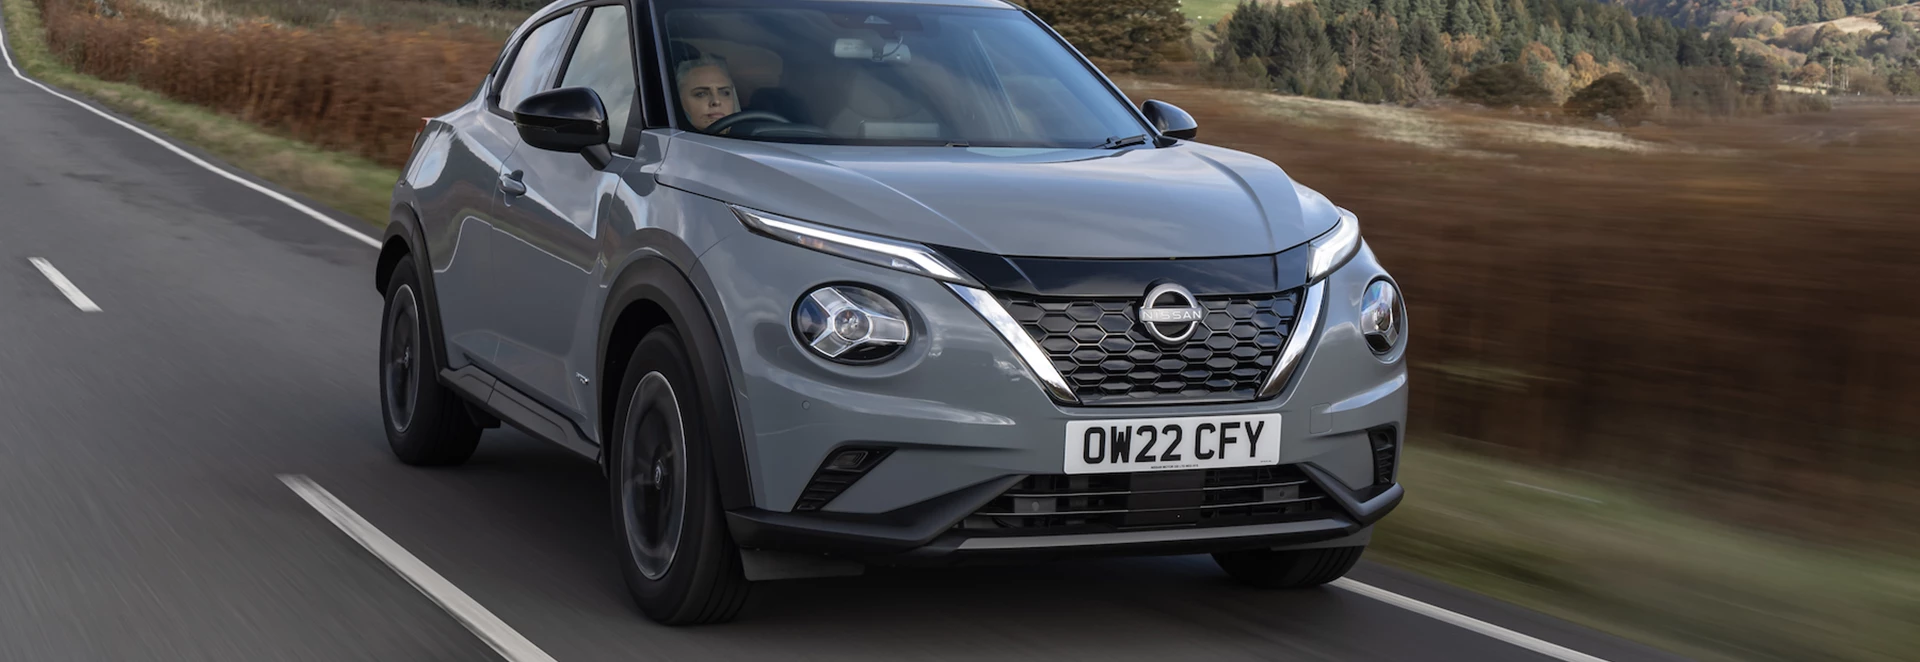 Nissan Juke Hybrid: What you need to know 